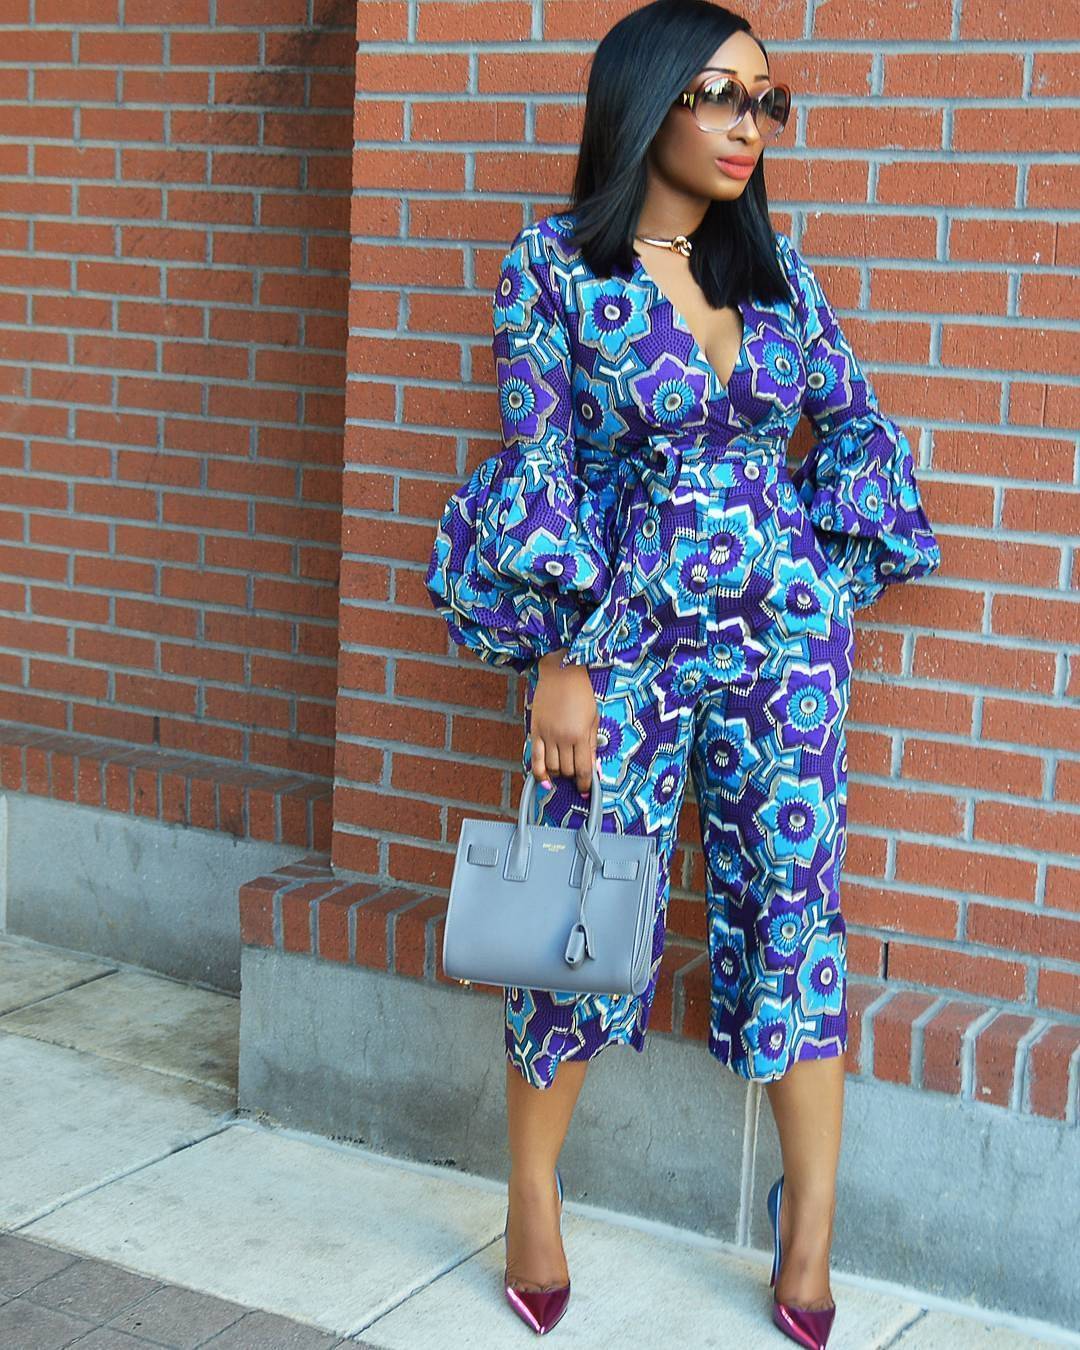  Mic Drop For the Ankara Styles Queens